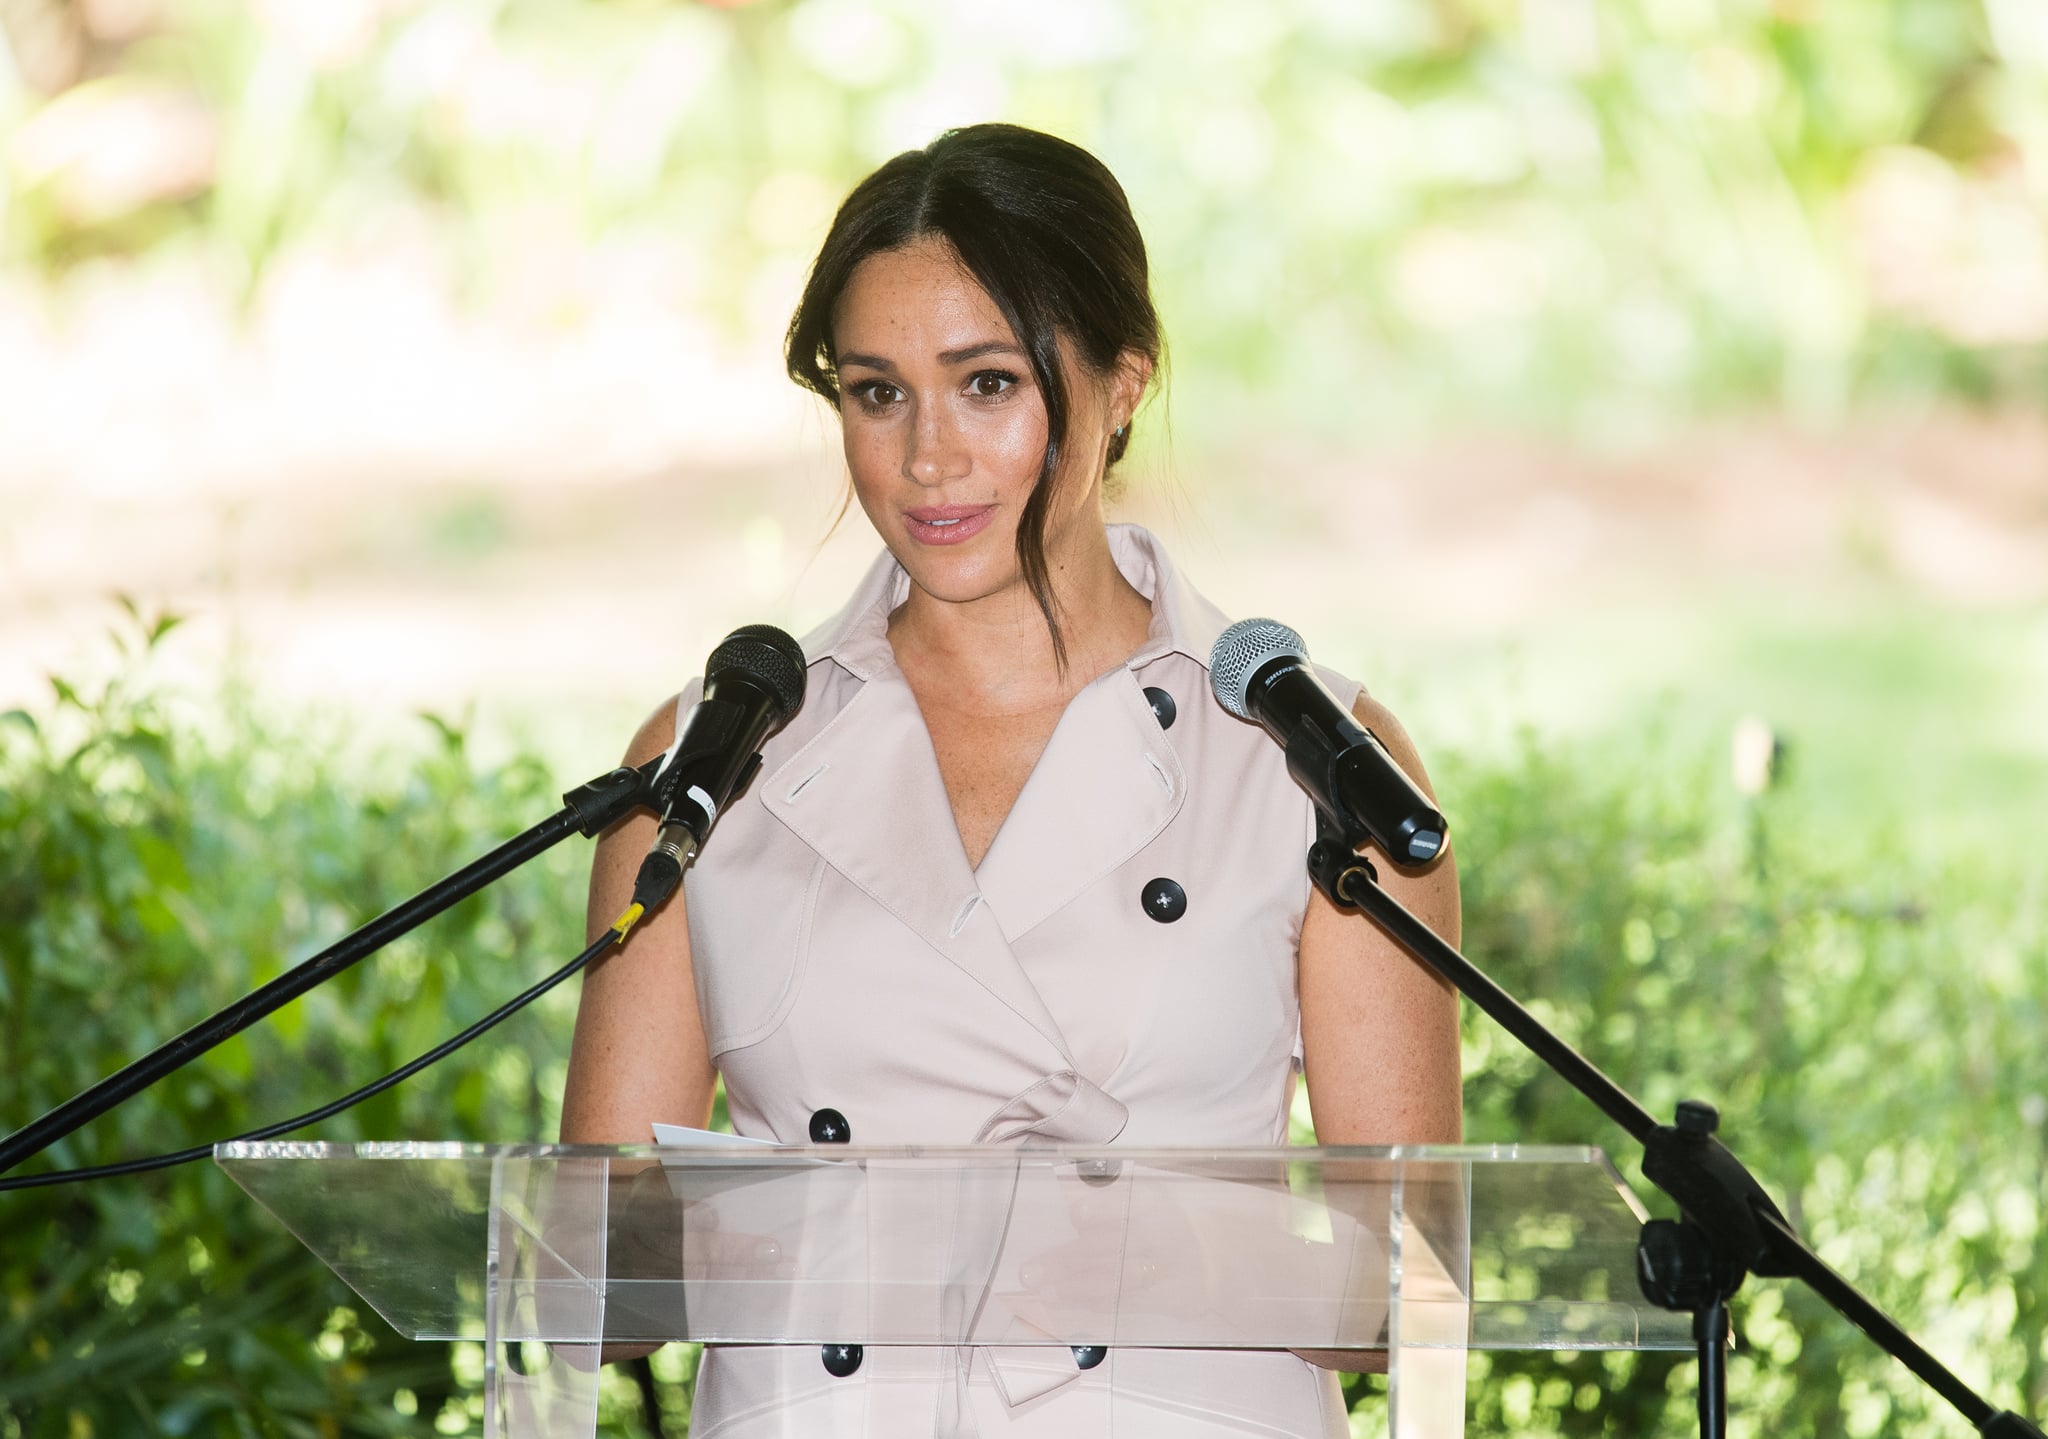 JJOHANNESBURG, SOUTH AFRICA - OCTOBER 02: Meghan, Duchess of Sussex gives a speech as she visits the British High Commissioner's residence to attend an afternoon reception to celebrate the UK and South Africa's important business and investment relationship, looking ahead to the Africa Investment Summit the UK will host in 2020. This is part of the Duke and Duchess of Sussex's royal tour to South Africa. on October 02, 2019 in Johannesburg, South Africa. (Photo by Samir Hussein/WireImage)